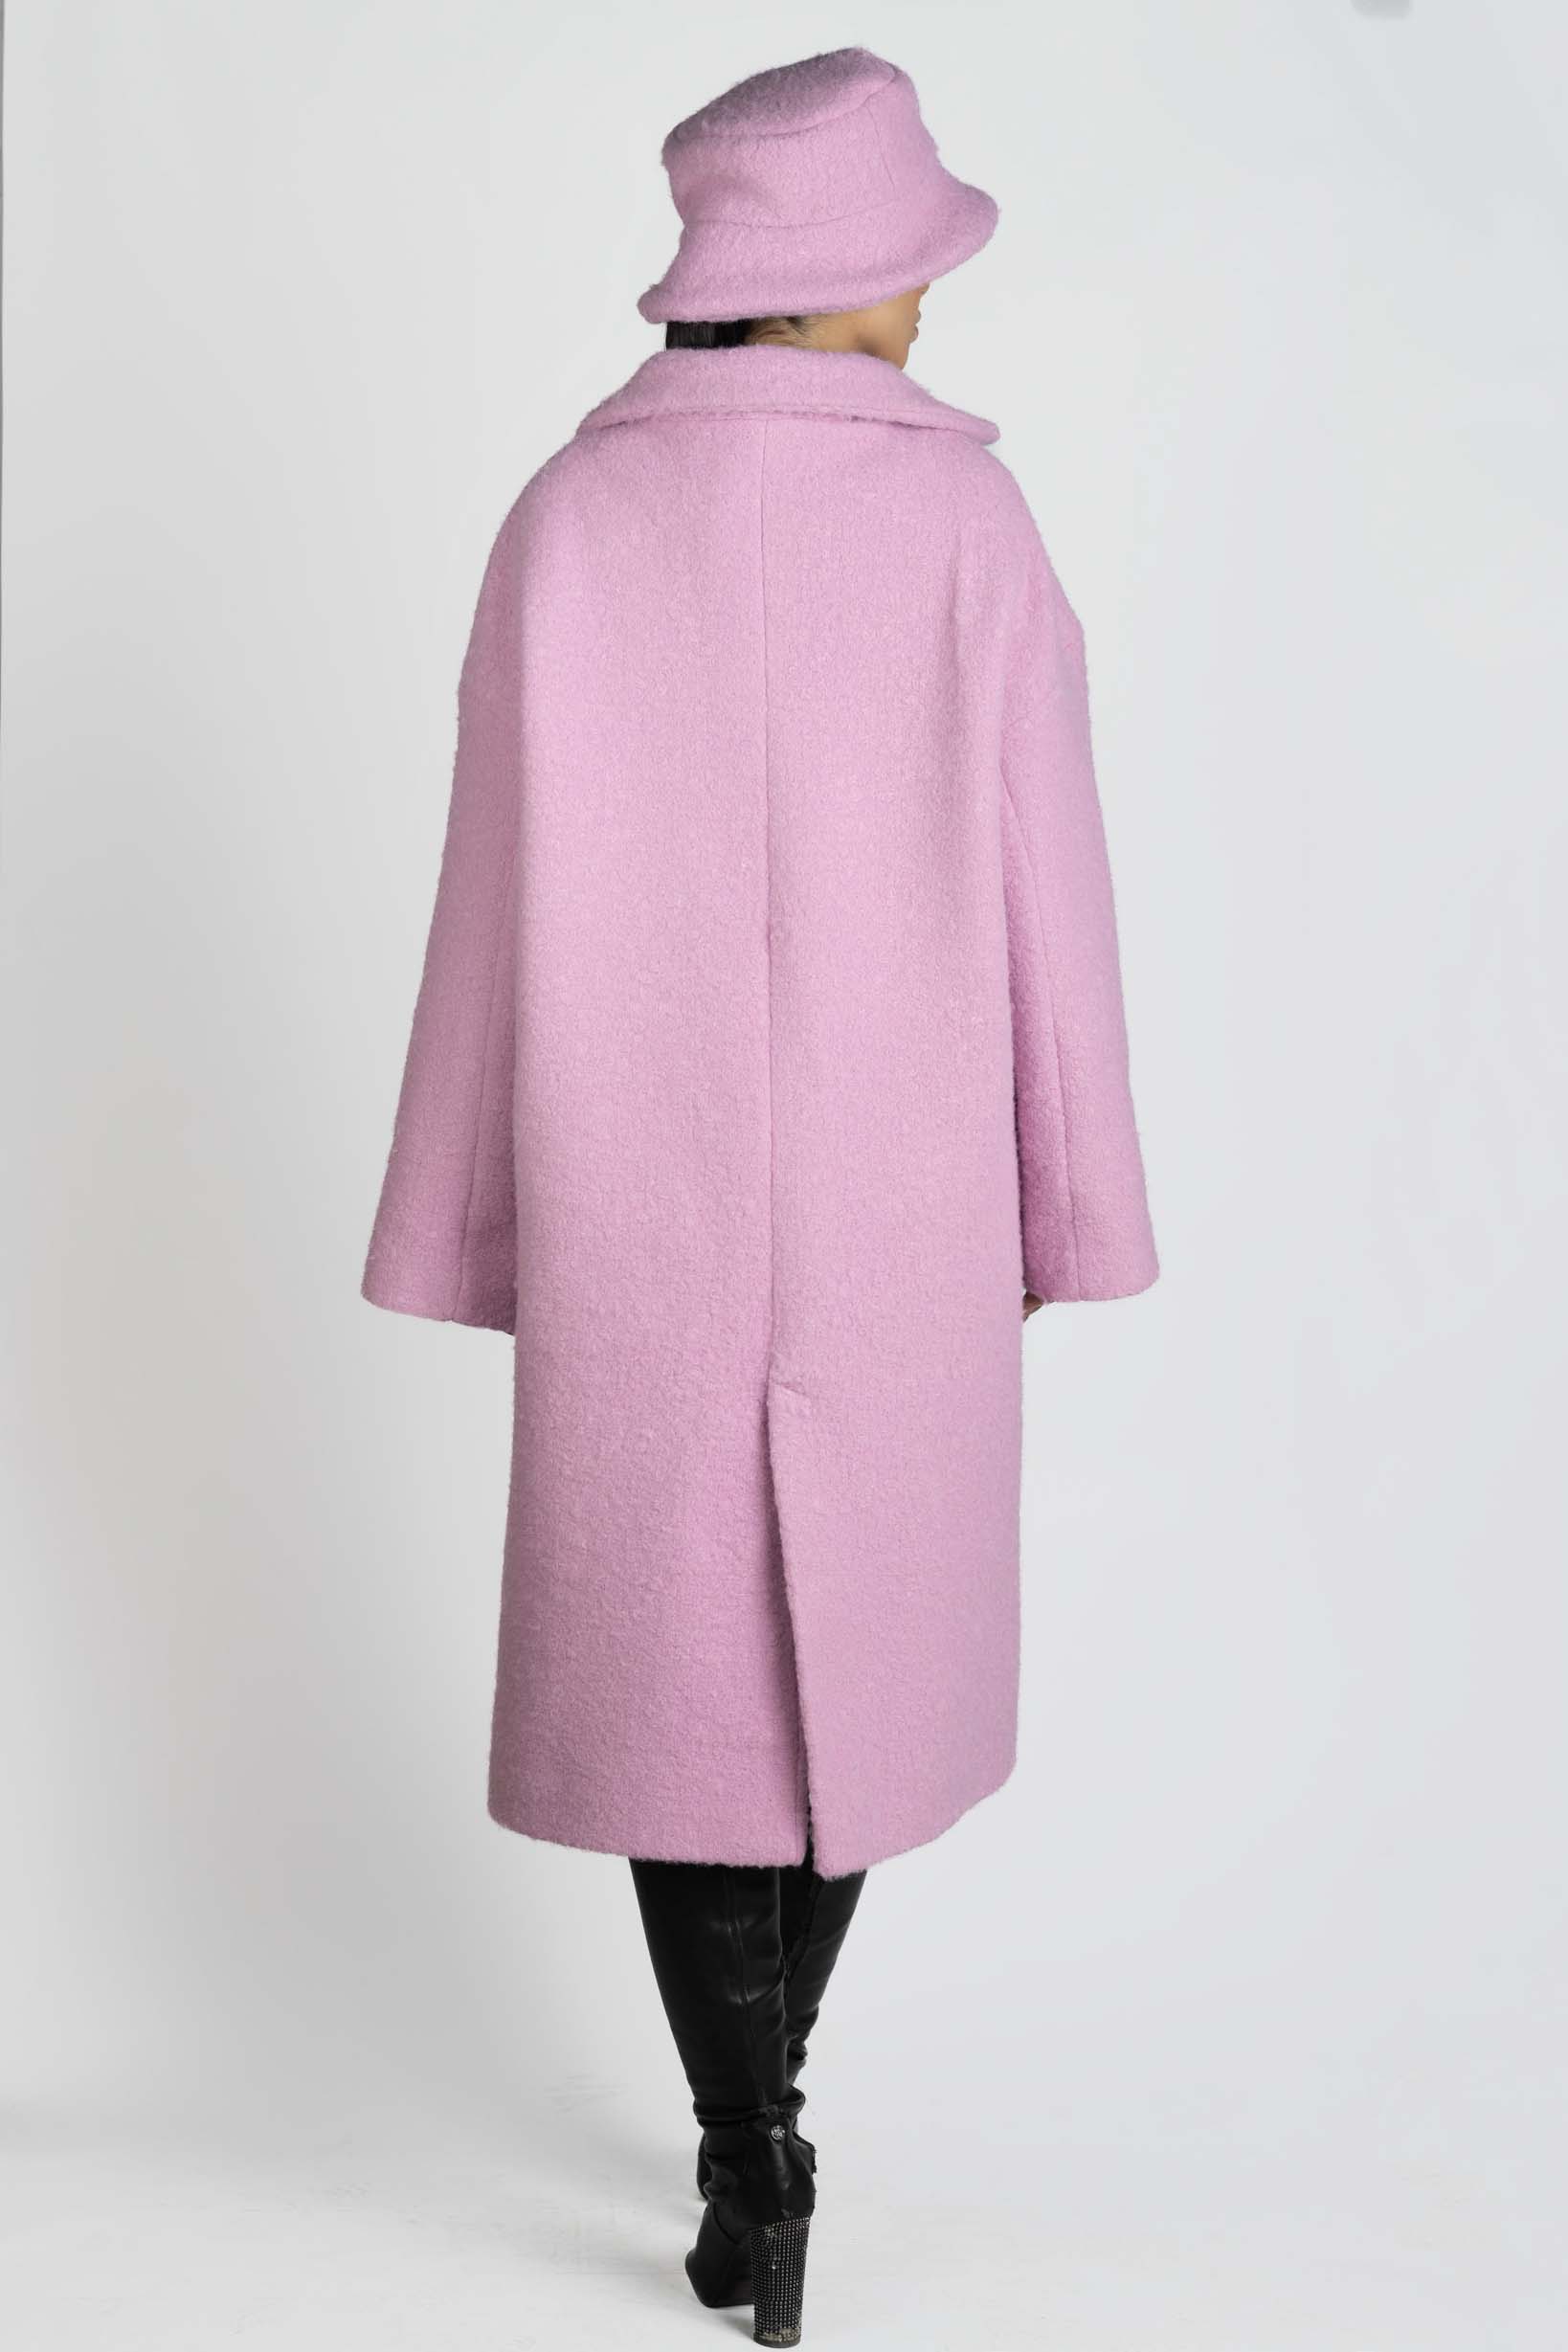 Wool Coat in Pink with long sleeves, pockets and magnetic-button fastening. Back.